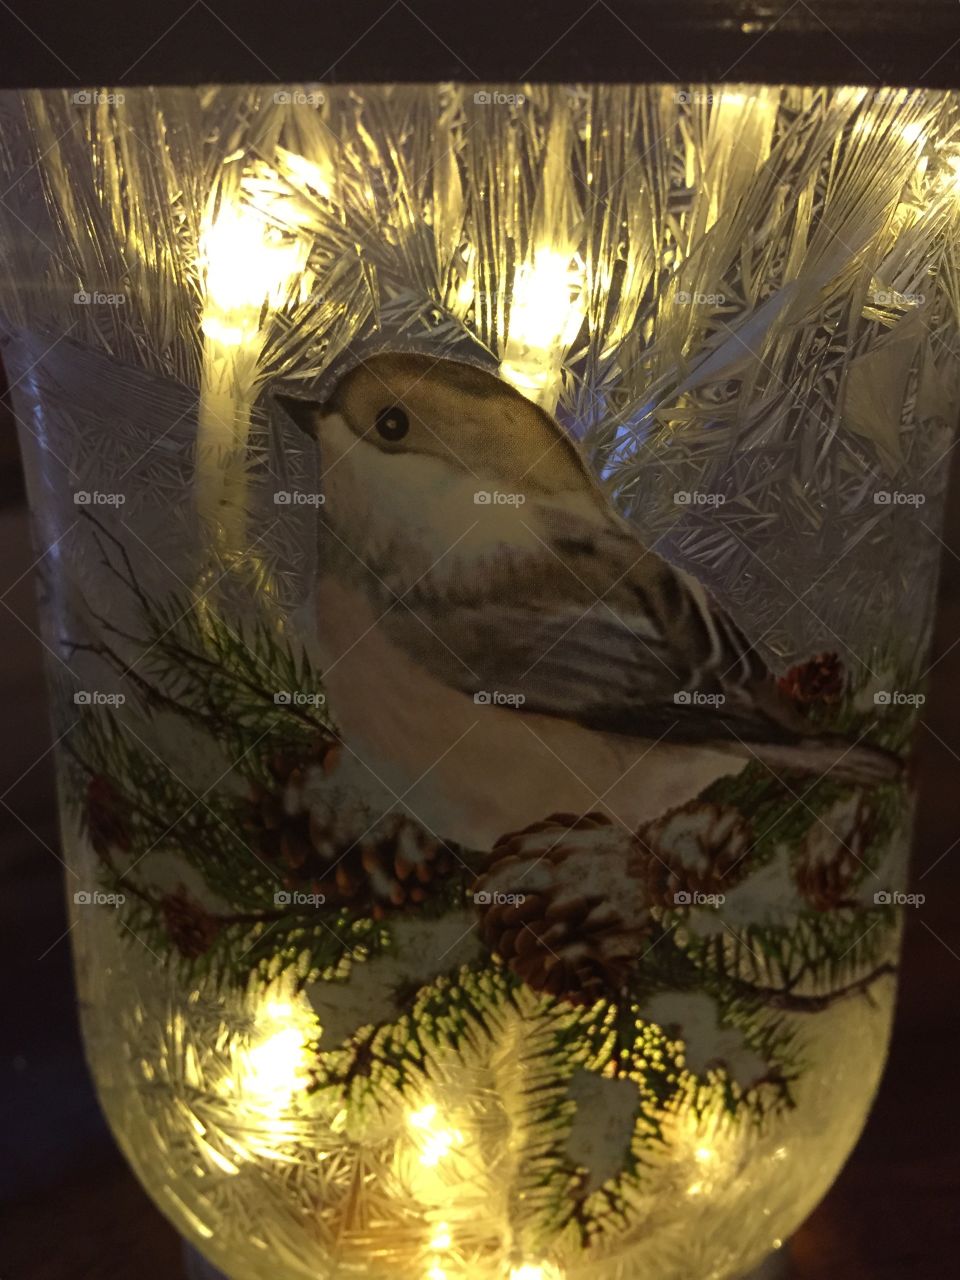 Beautiful frosted glass container with bird painted on it and lights inside making a glowing  piece.